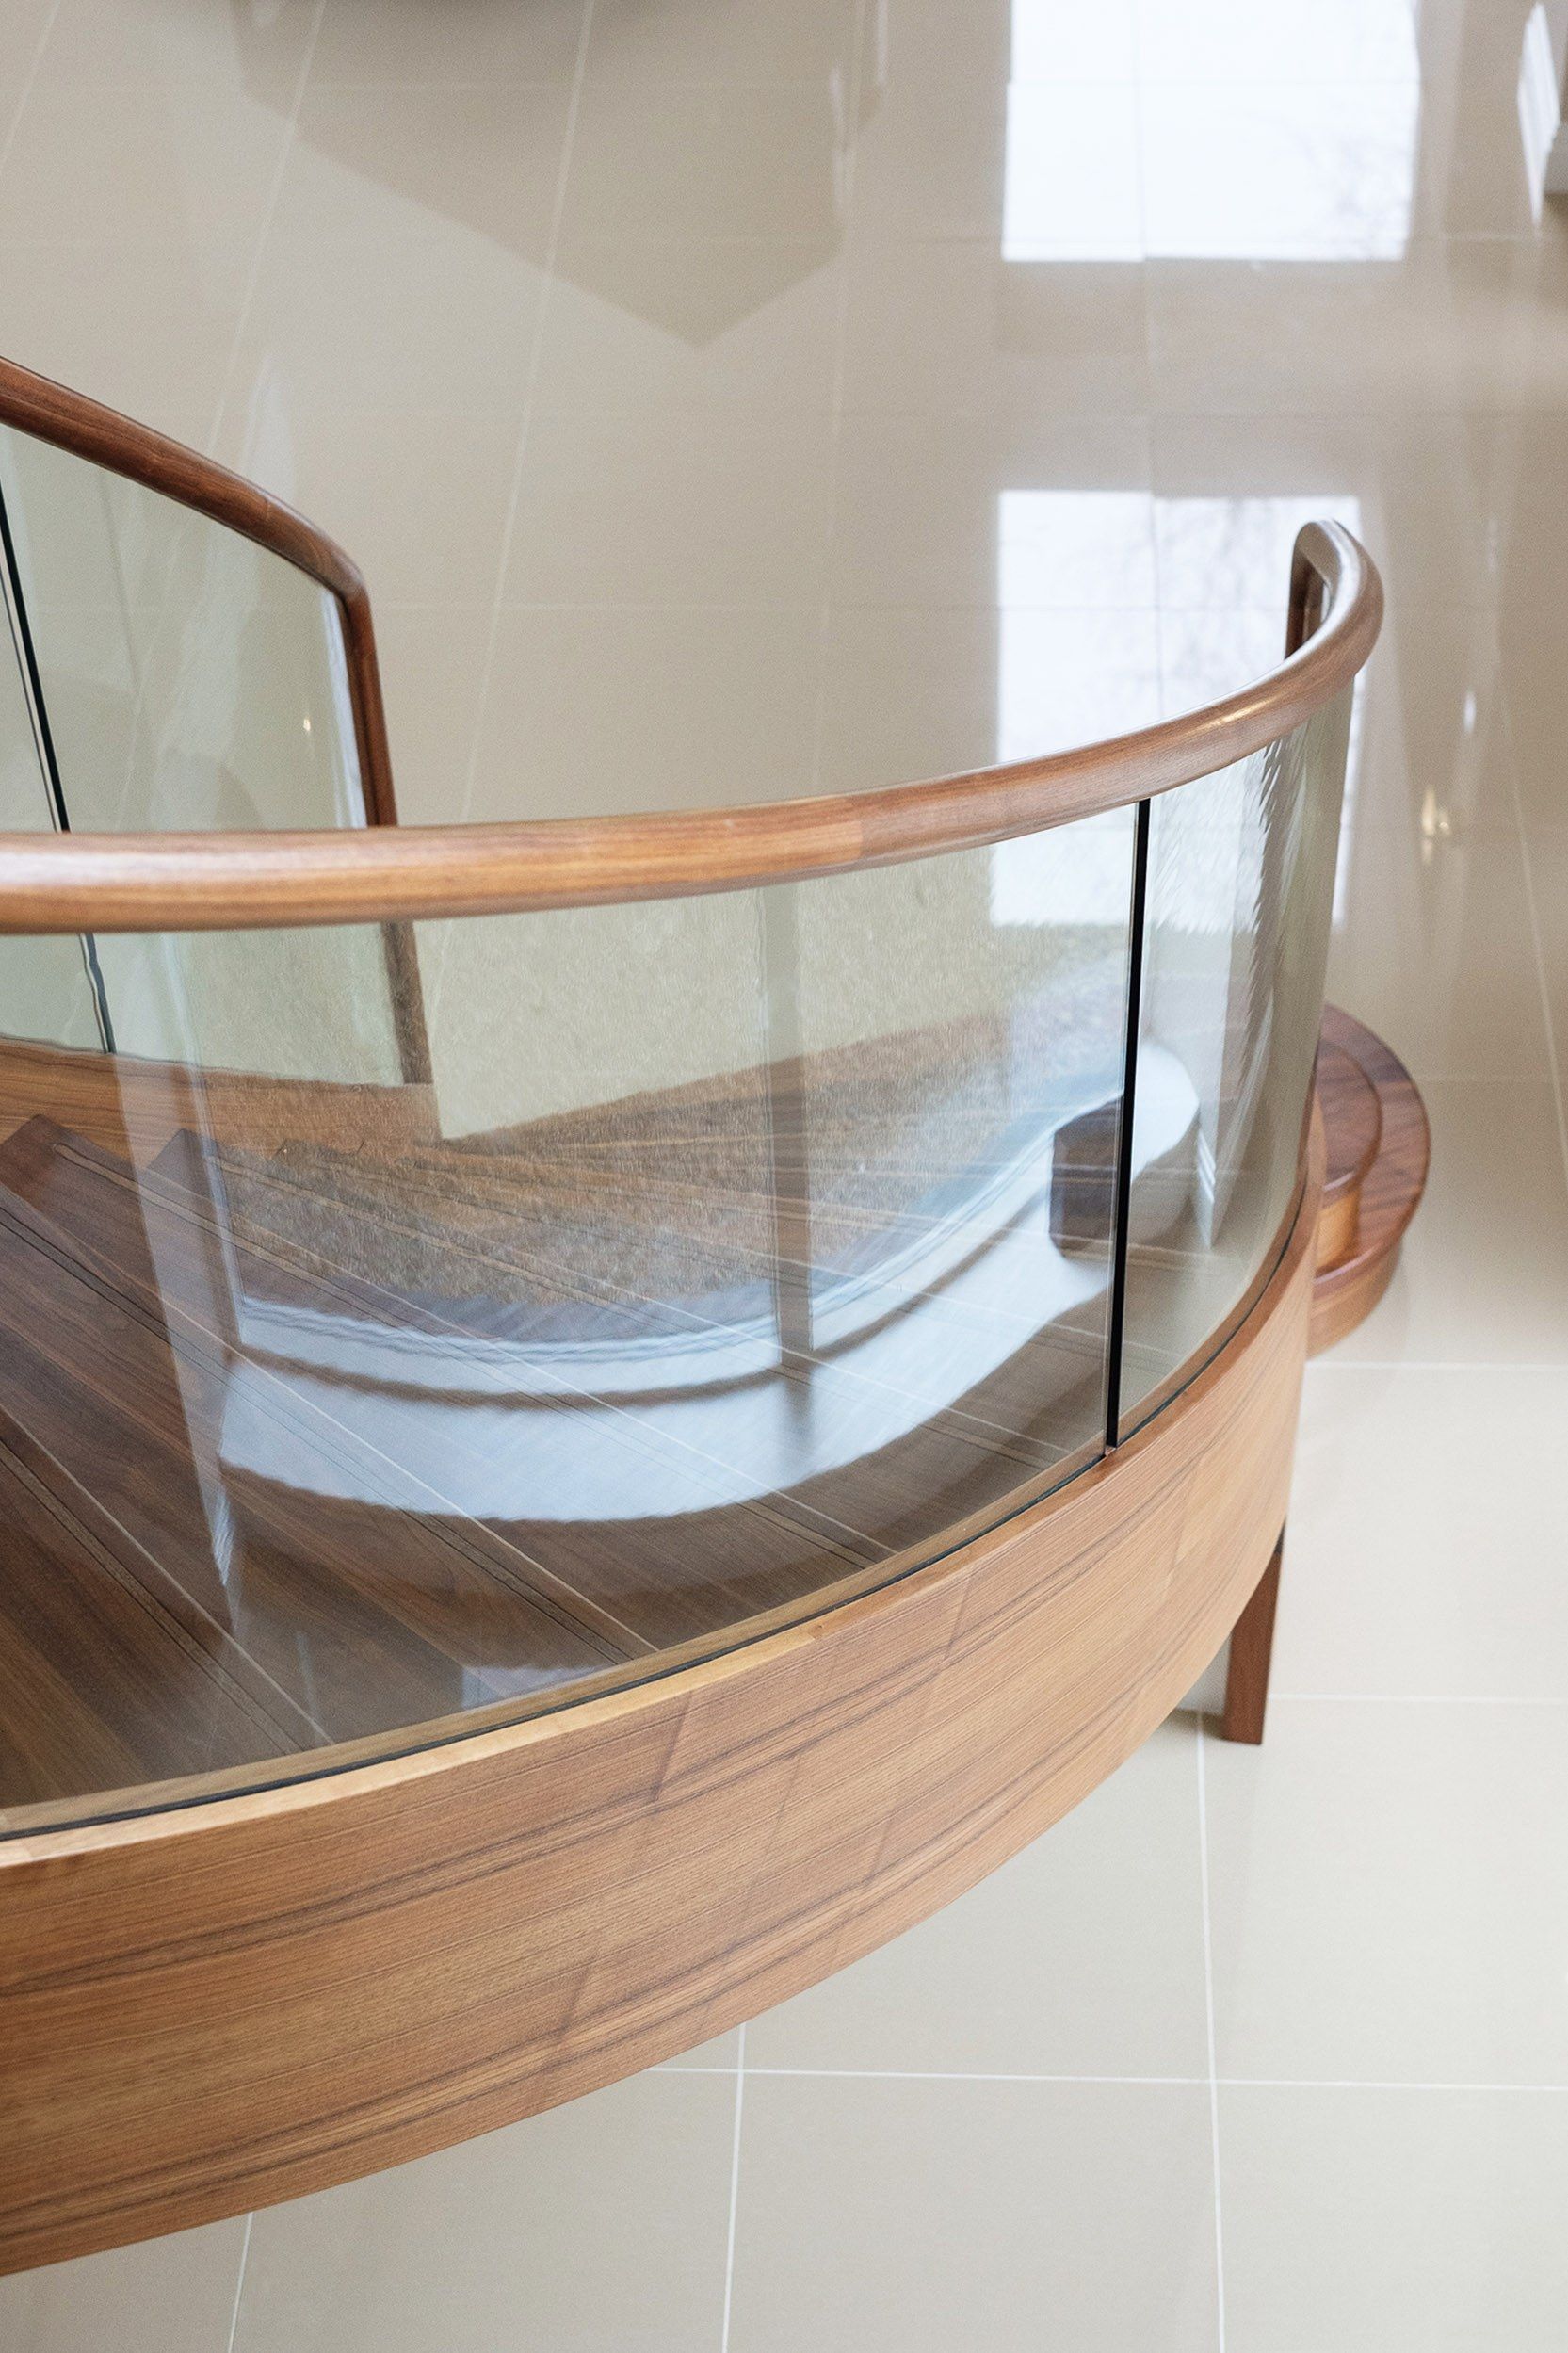 Plan view of sweeping curved walnut stair with curved glass and polished grey tile floor.